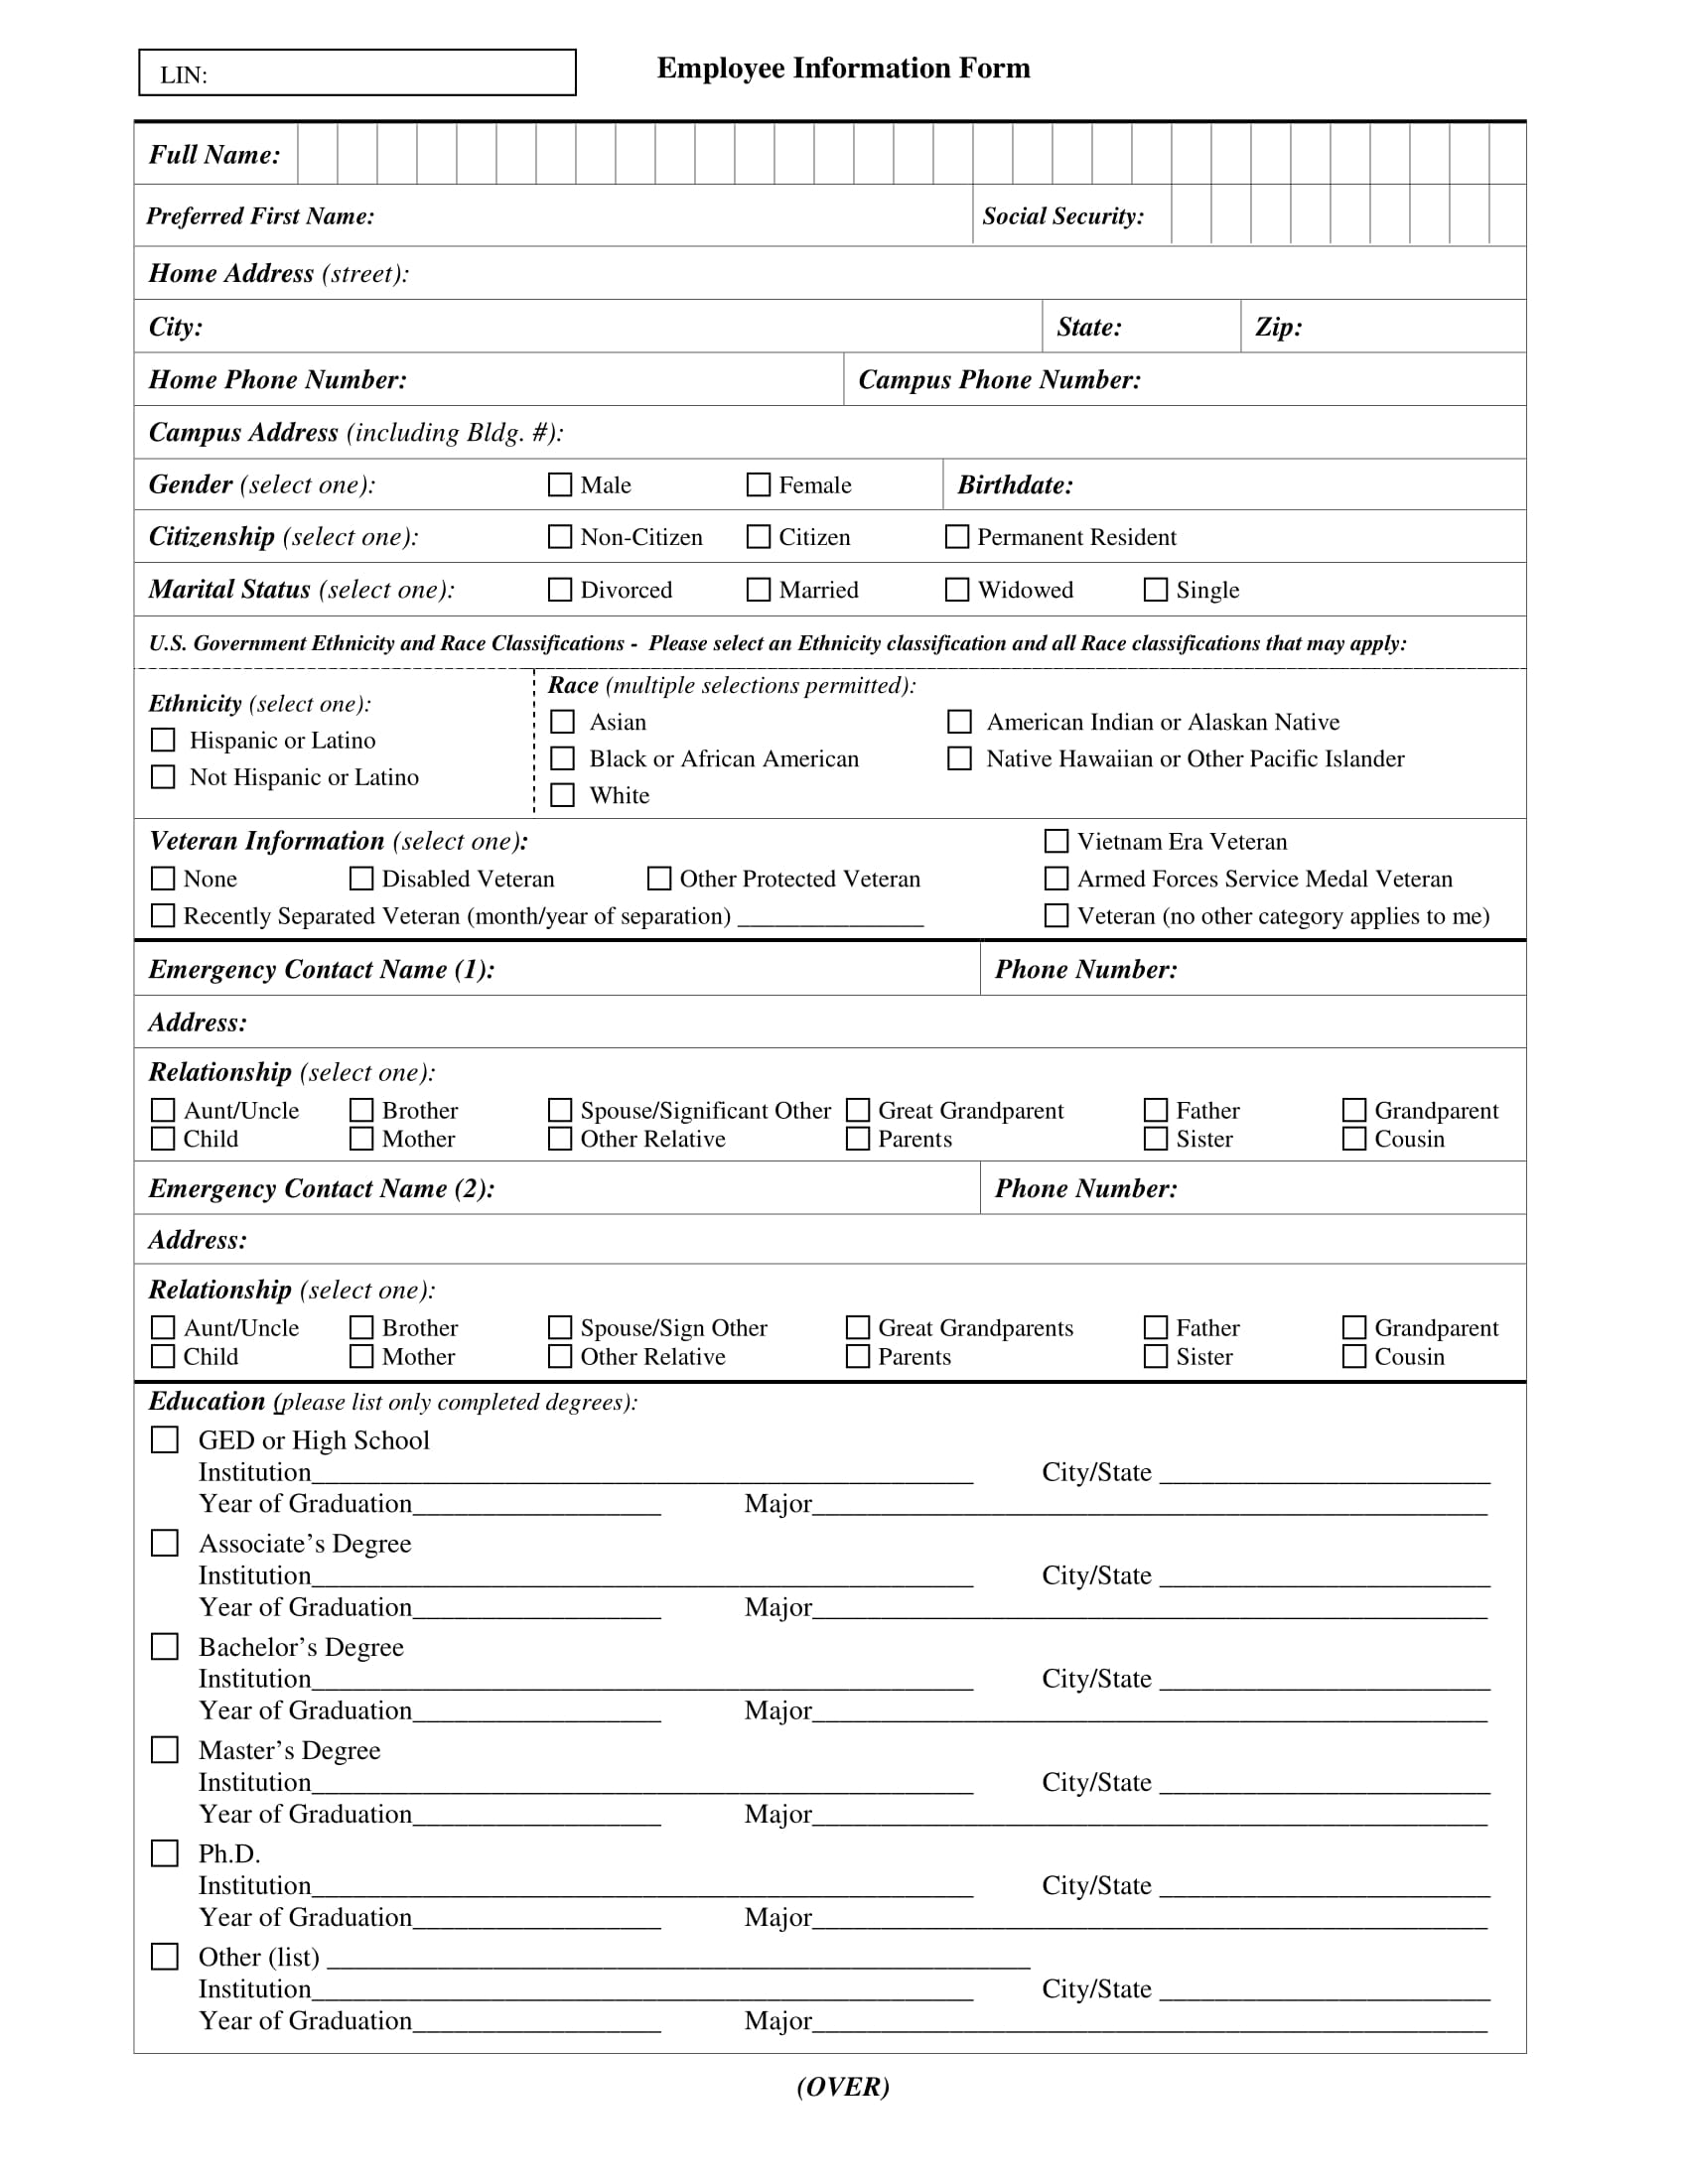 printable-employee-information-form-printable-forms-free-online